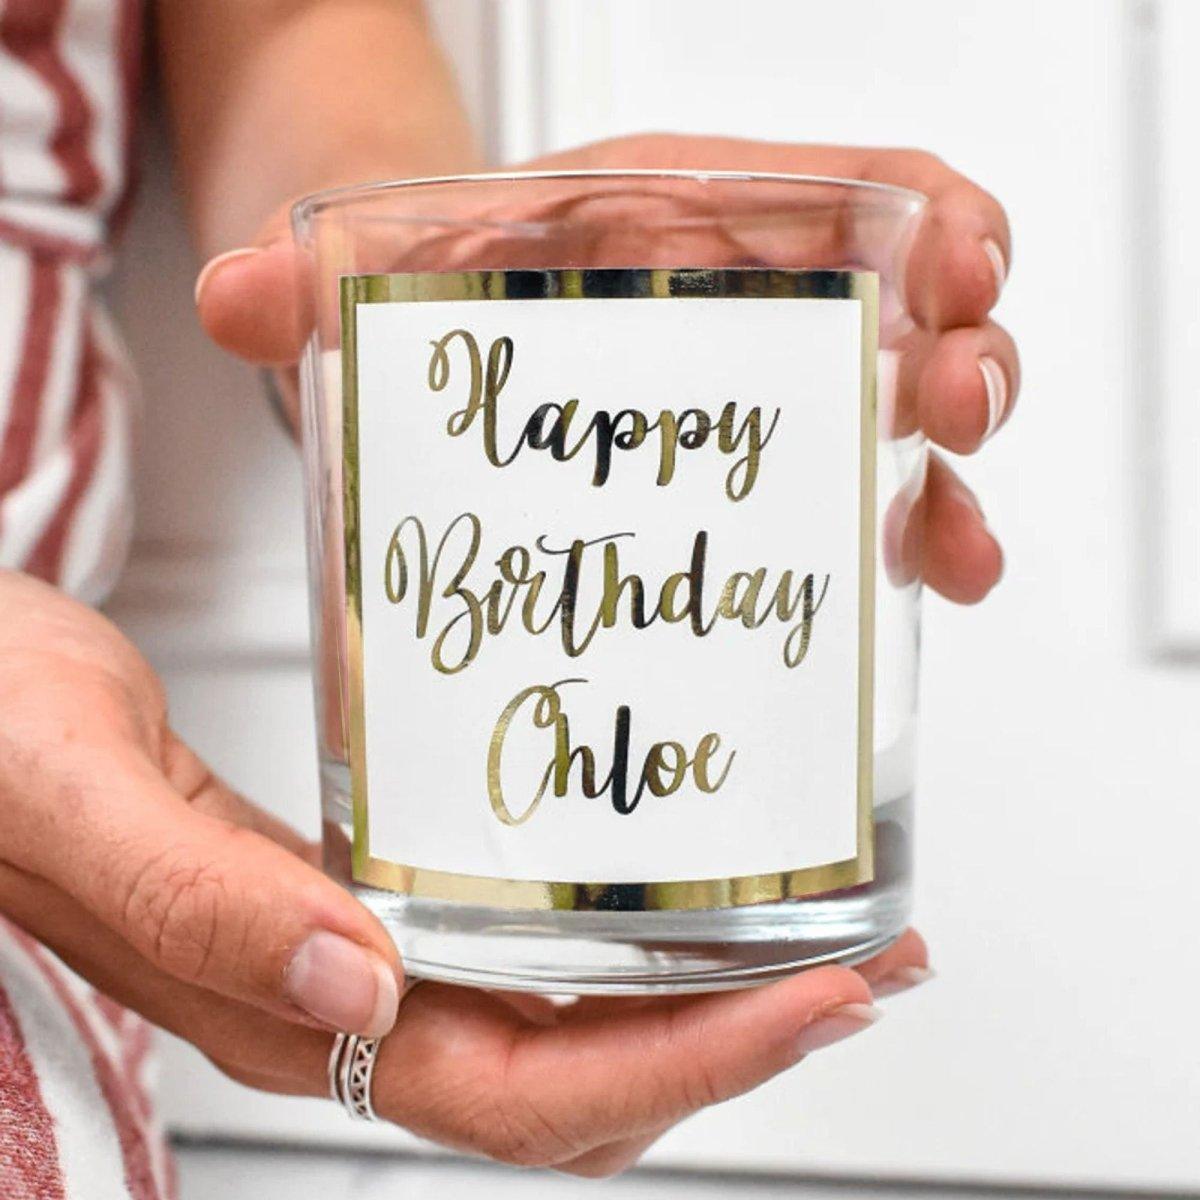 Personalised Happy Birthday Candle, Personalised Birthday Candle Gift, Birthday Party Candles, 21st Birthday Gift, Gift for Her - Amy Lucy